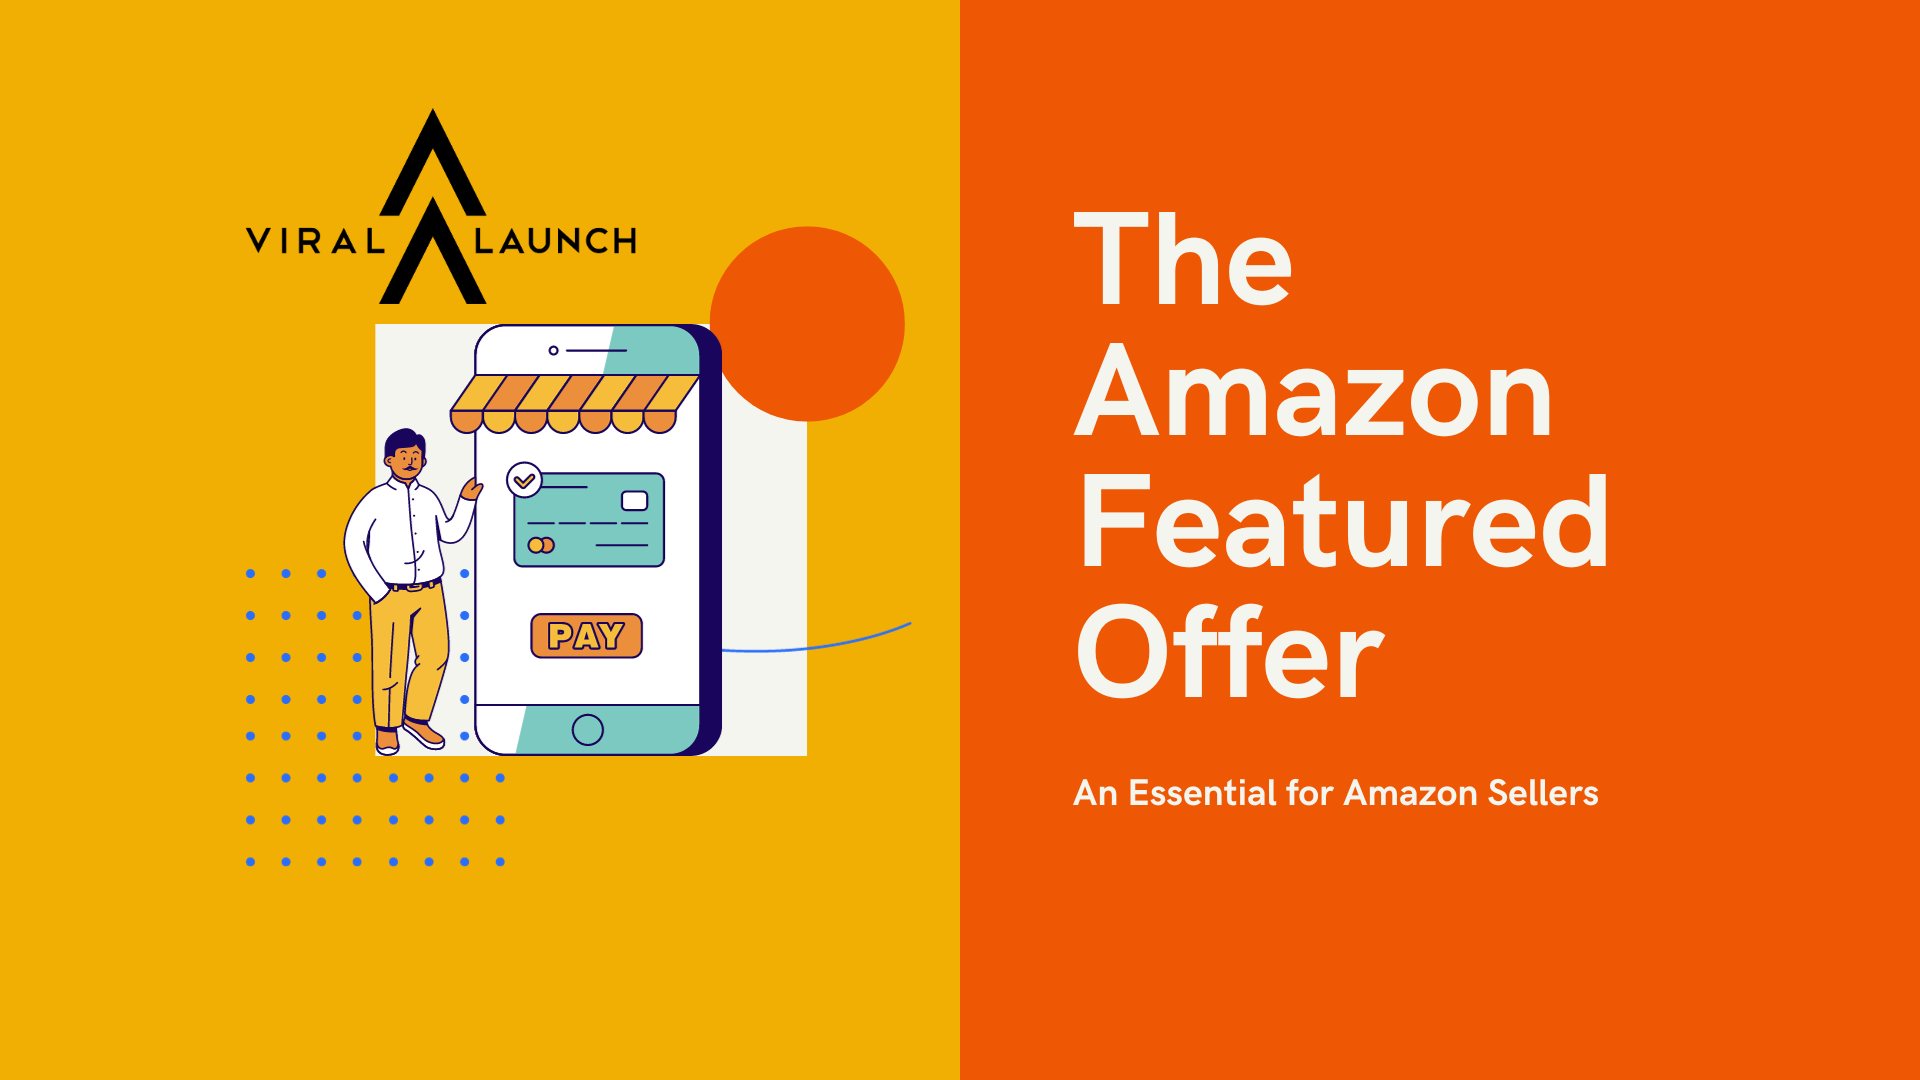 "The Amazon Featured Offer" as essential for Amazon sellers, presented by "Viral Launch," with an illustration of a person near a mobile payment interface.